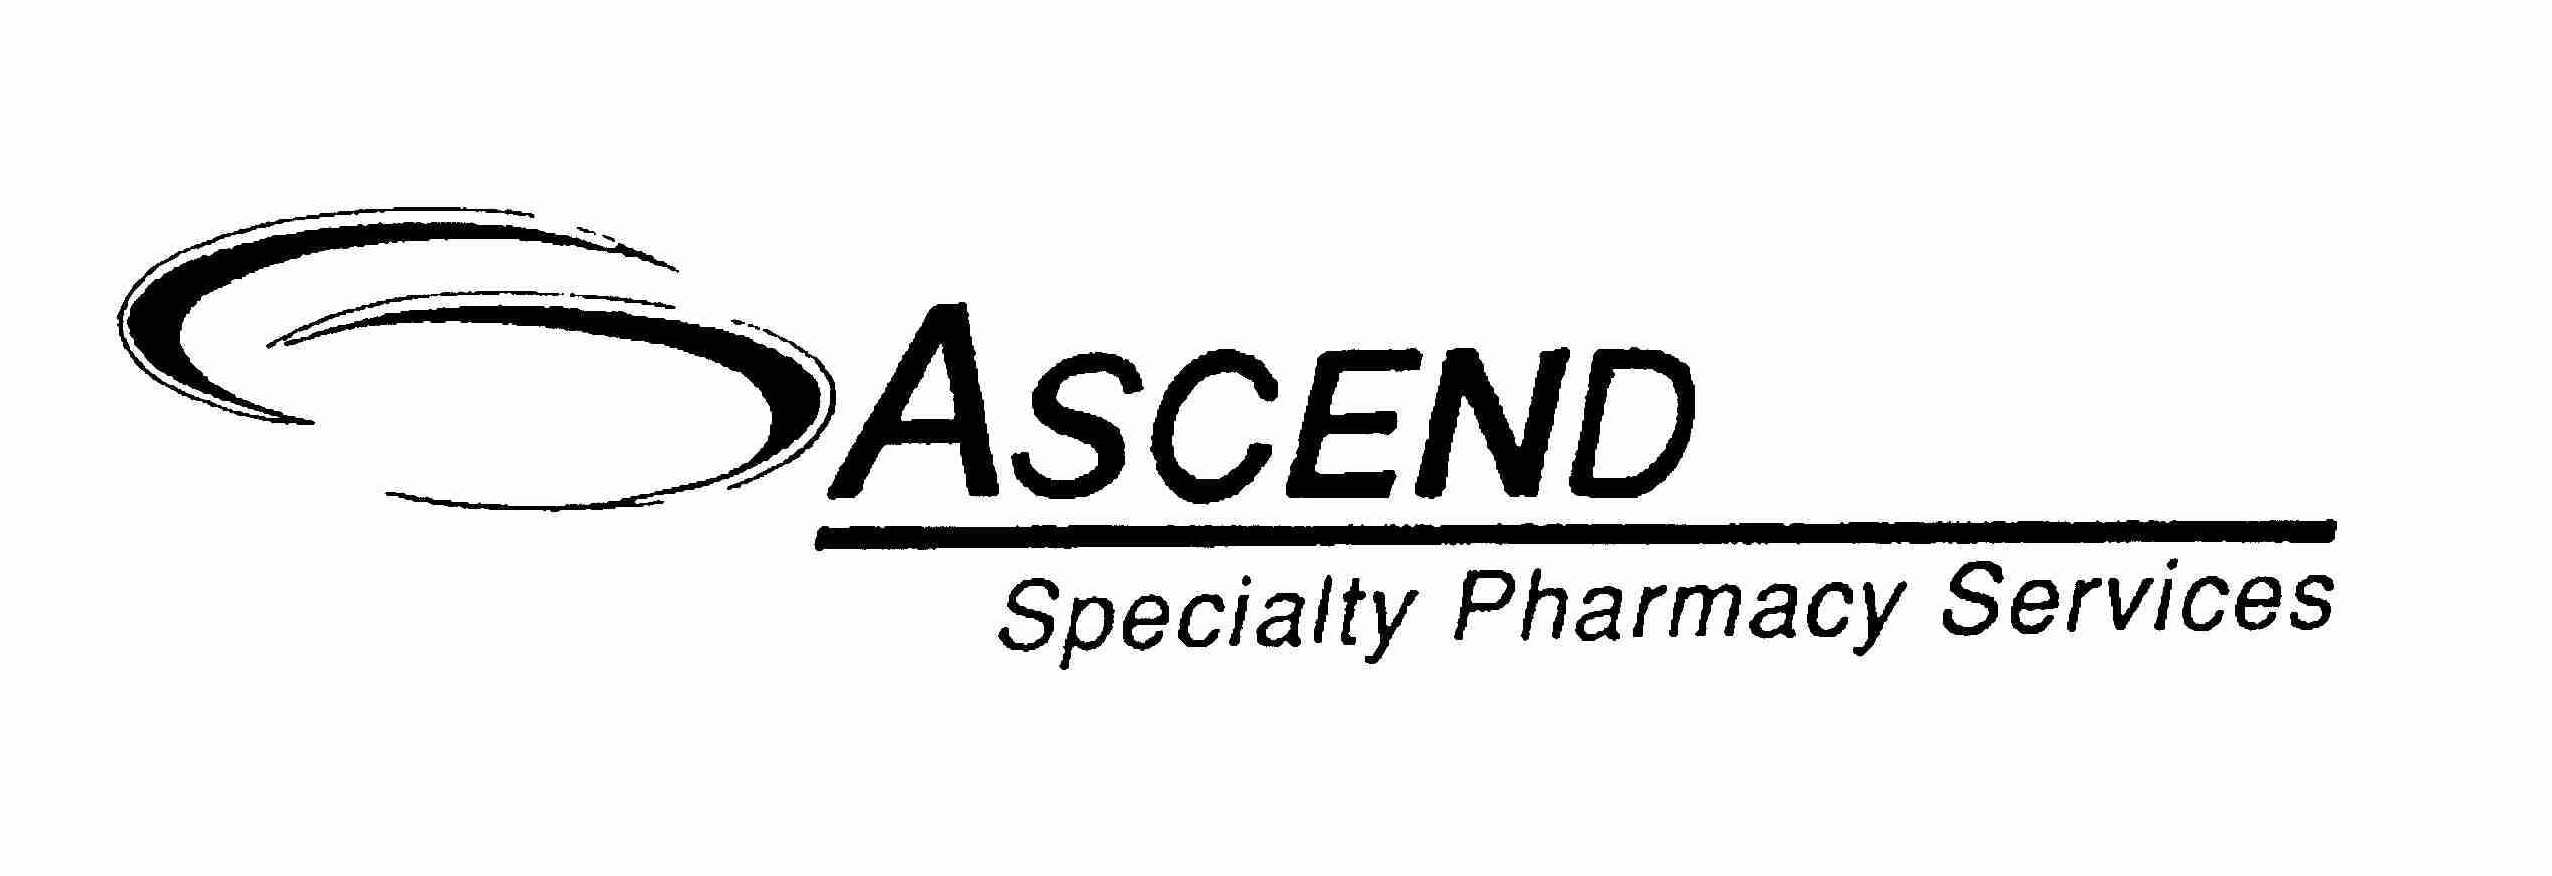  ASCEND SPECIALTY PHARMACY SERVICES